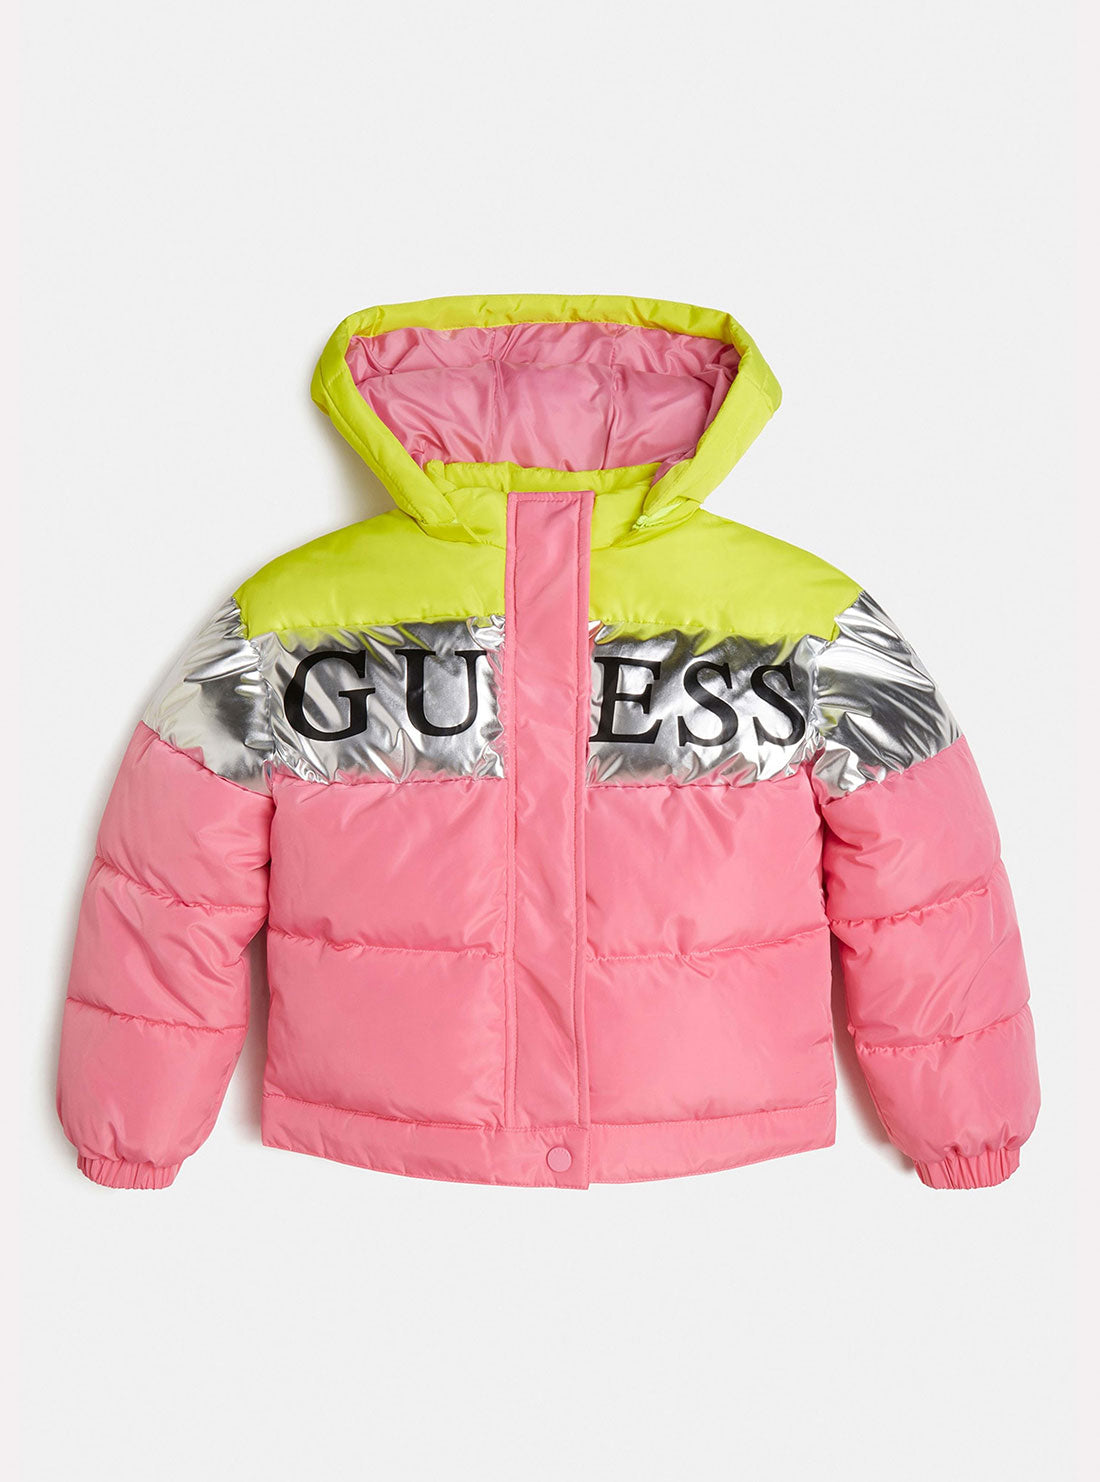 GUESS Big Girl Silver Pink Multi Logo Puffer Jacket (7-16) J2BL12WB240 Front View